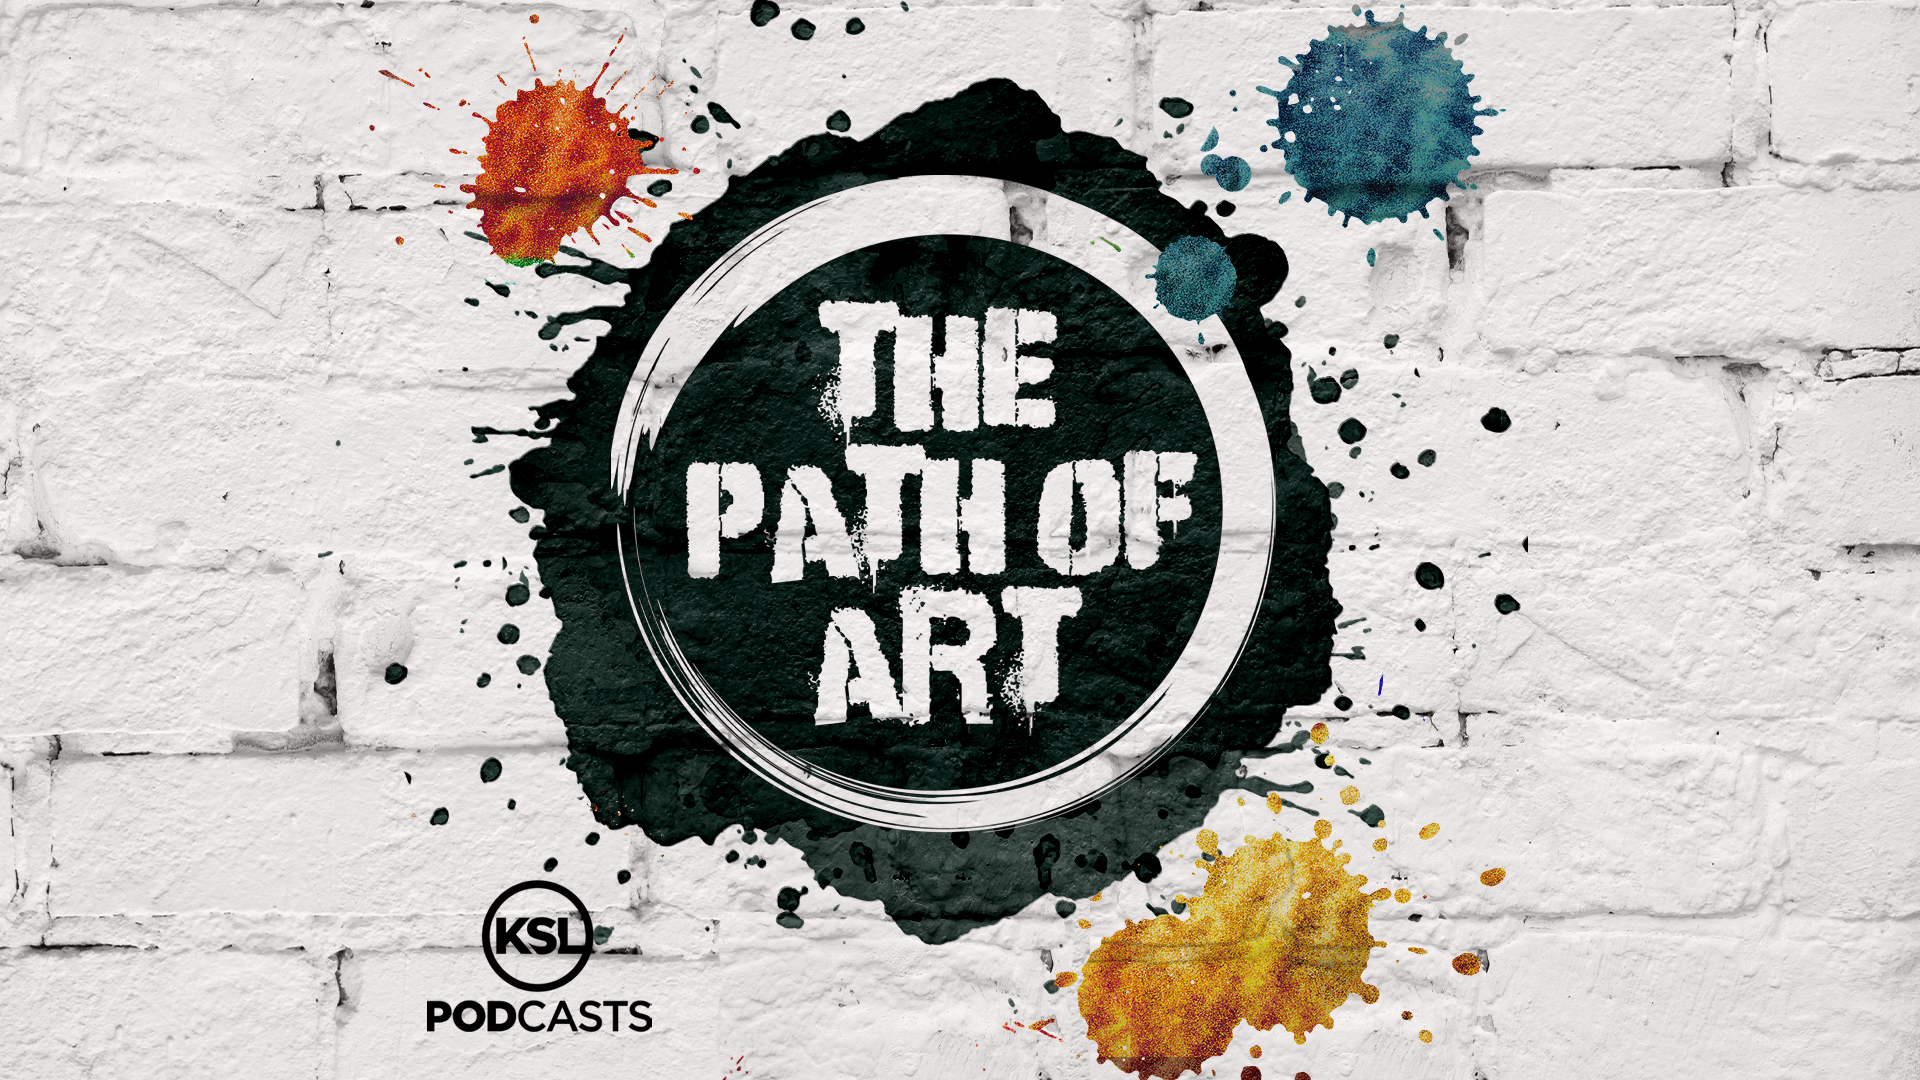 The Path of Art explores artists lives....